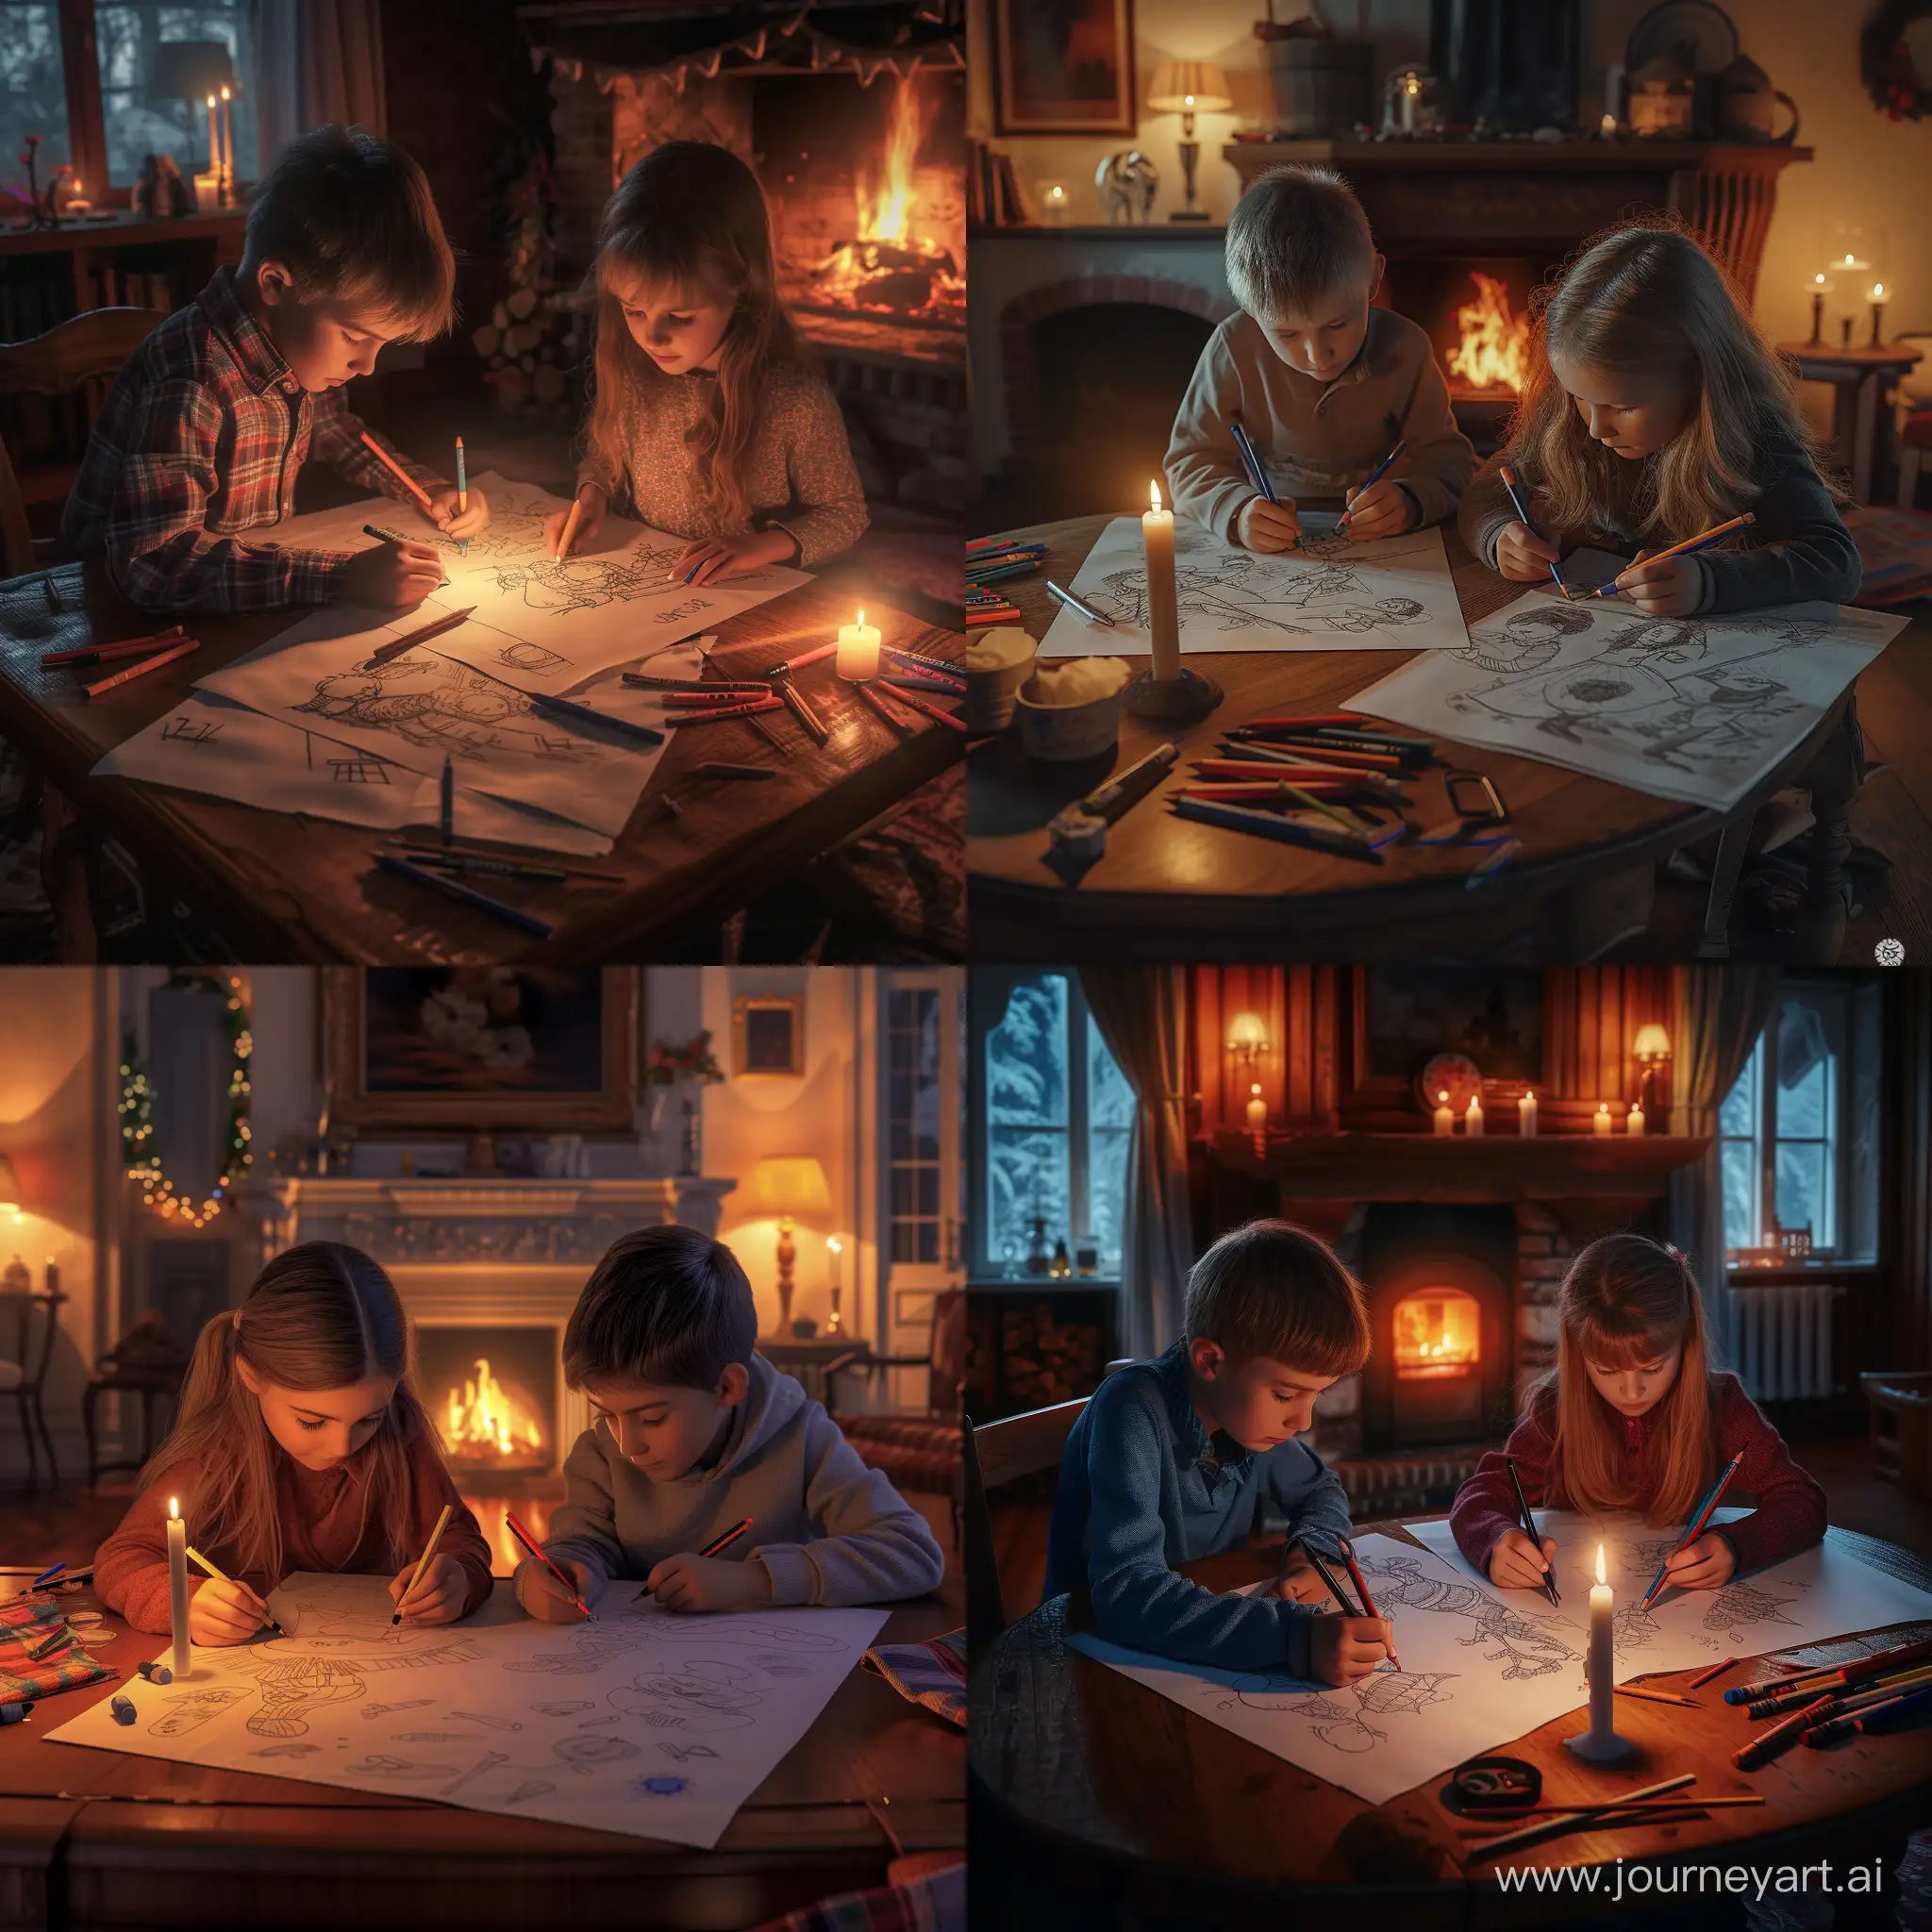 Cozy-Evening-Kids-Drawing-by-Candlelight-in-a-Warm-Room